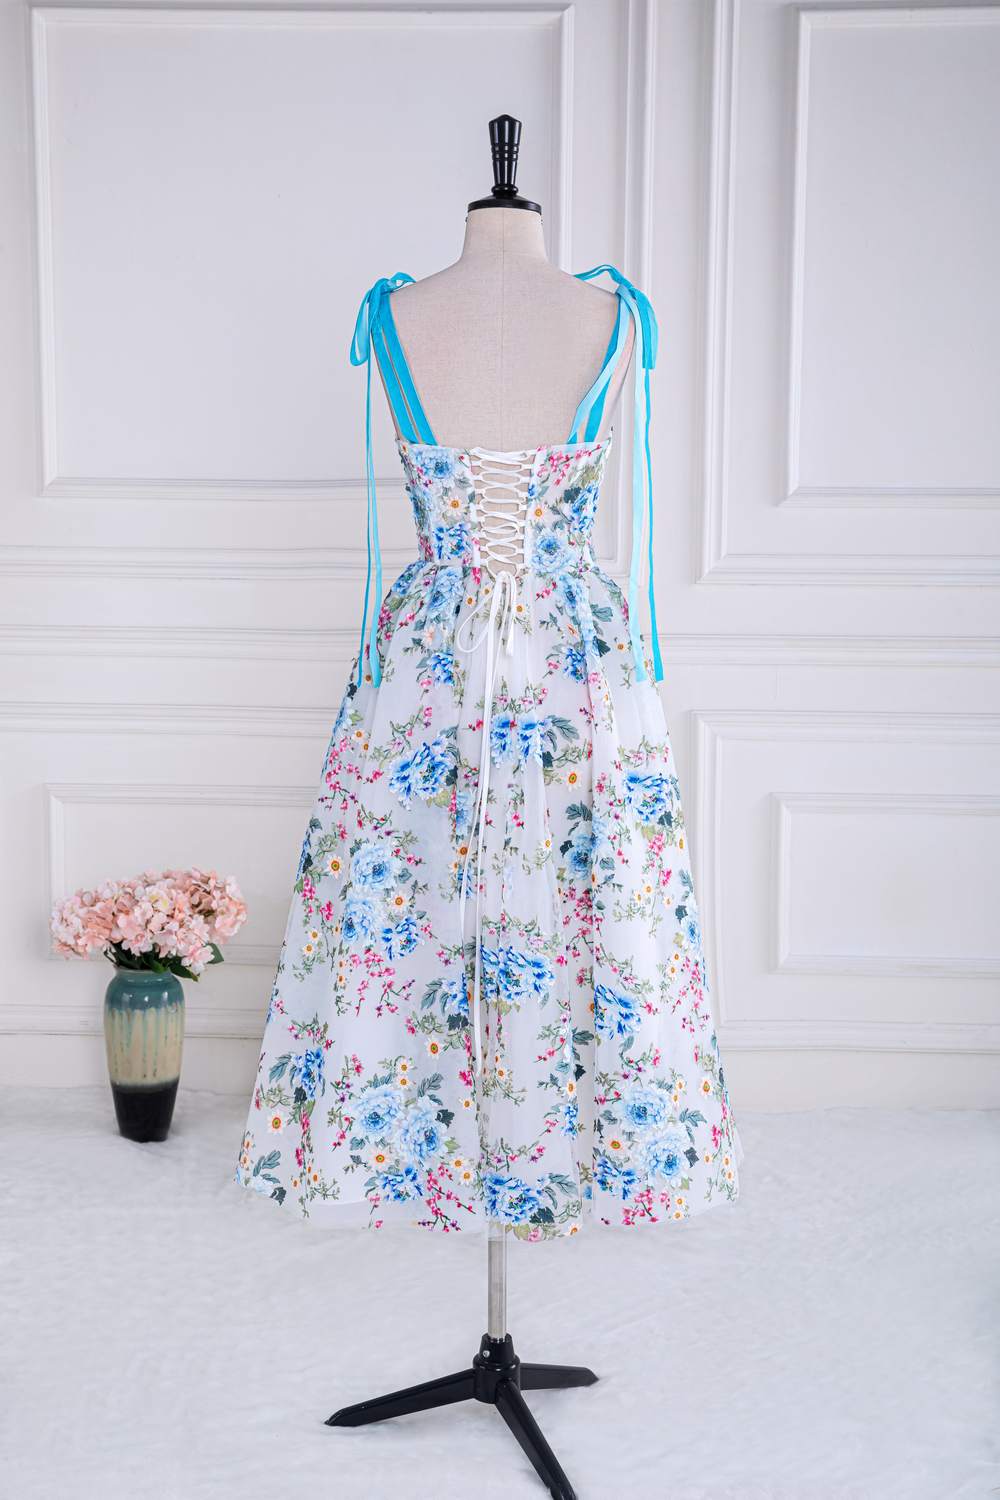 Prom Dresses With Short, Blue and White Floral Bow Tie Straps A-line Tea-Length Prom Dress